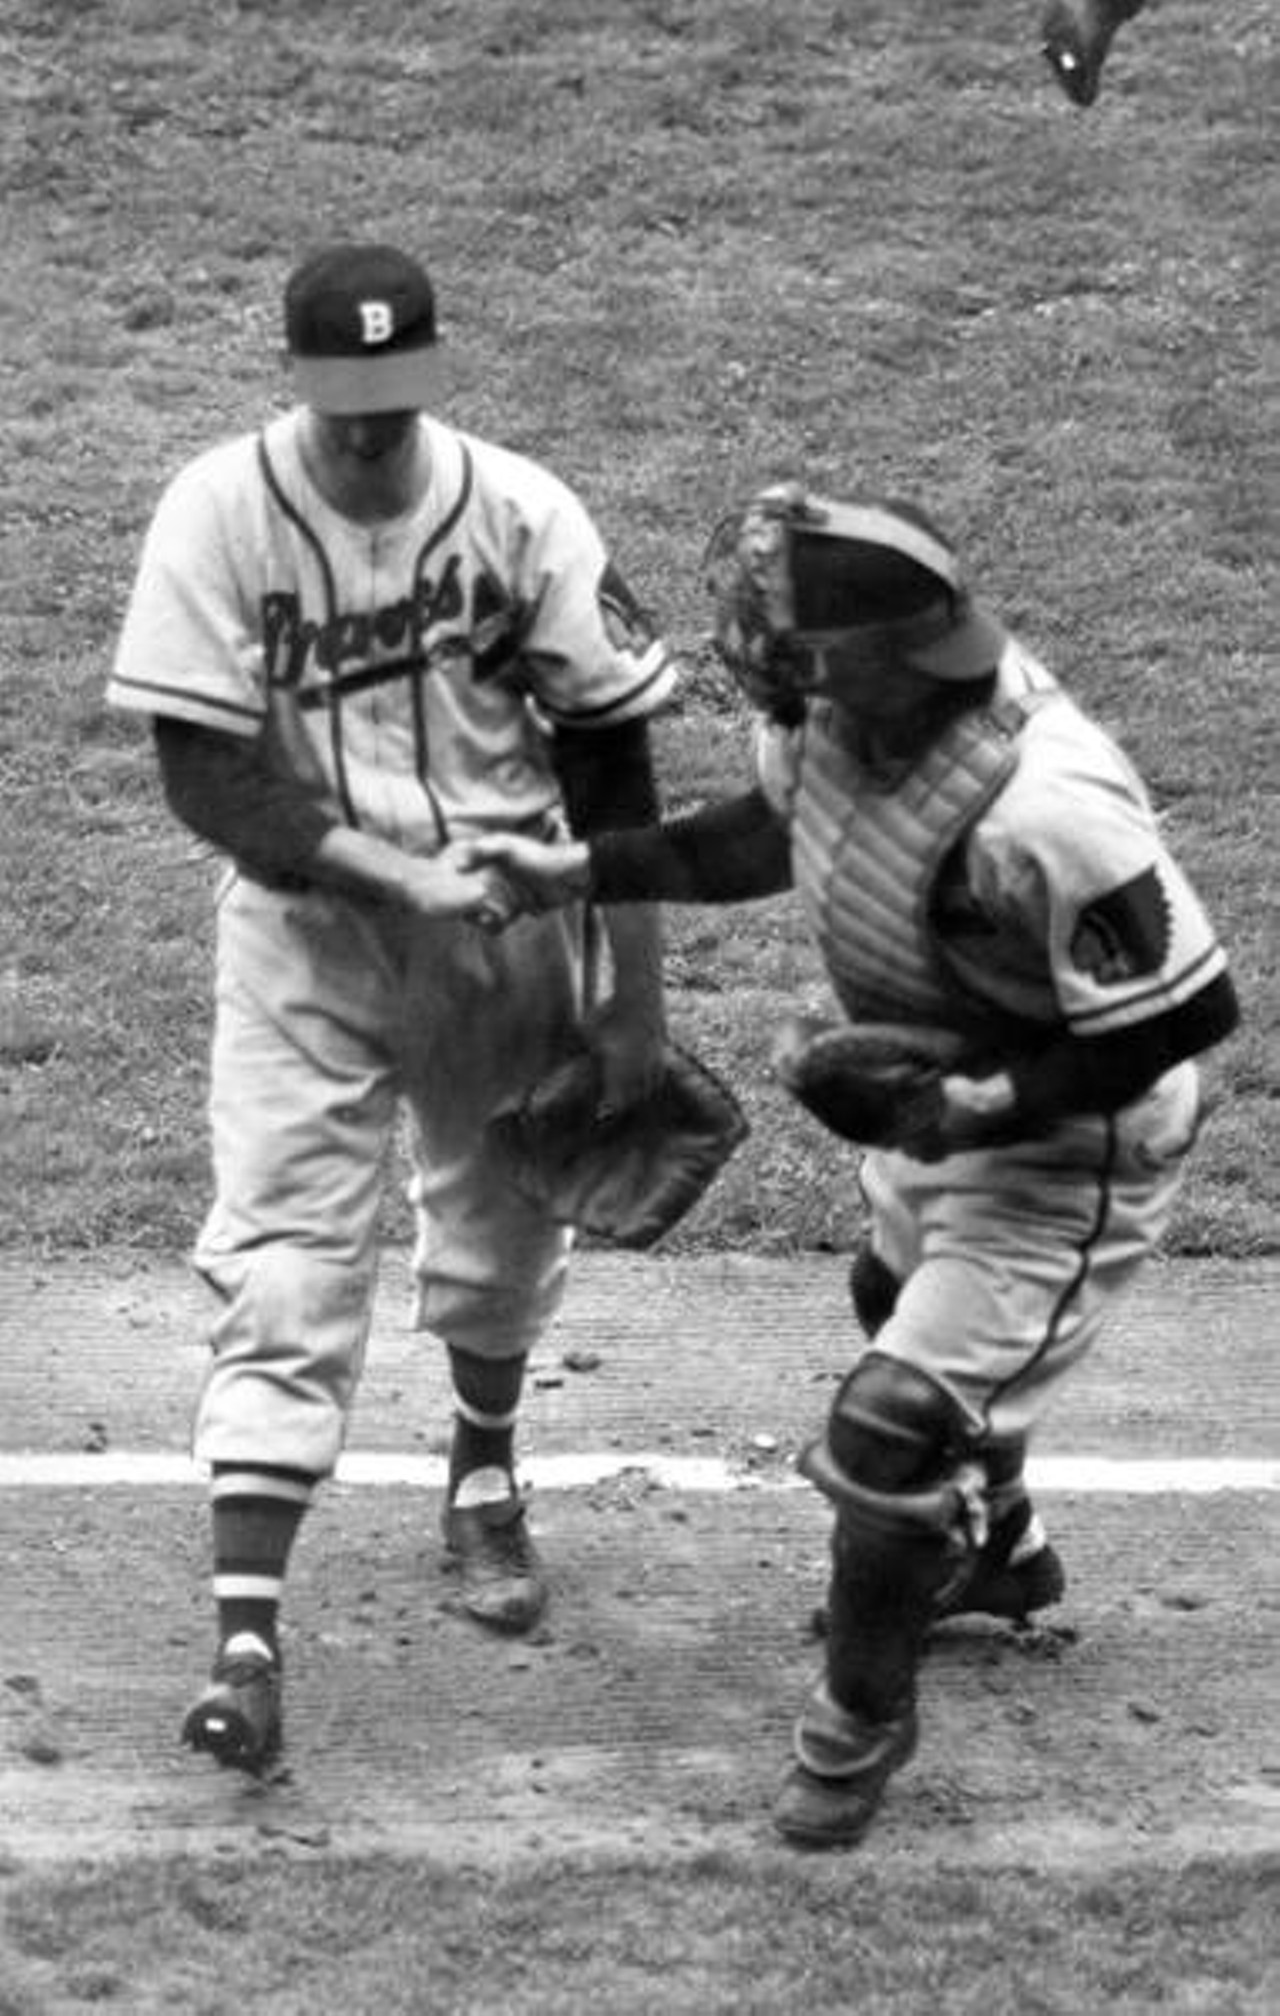 Boston Braves pitcher Warren Spahn receives congratulations from Bill Salkeld in Game 5 of the World Series against the Cleveland Indians in 1948